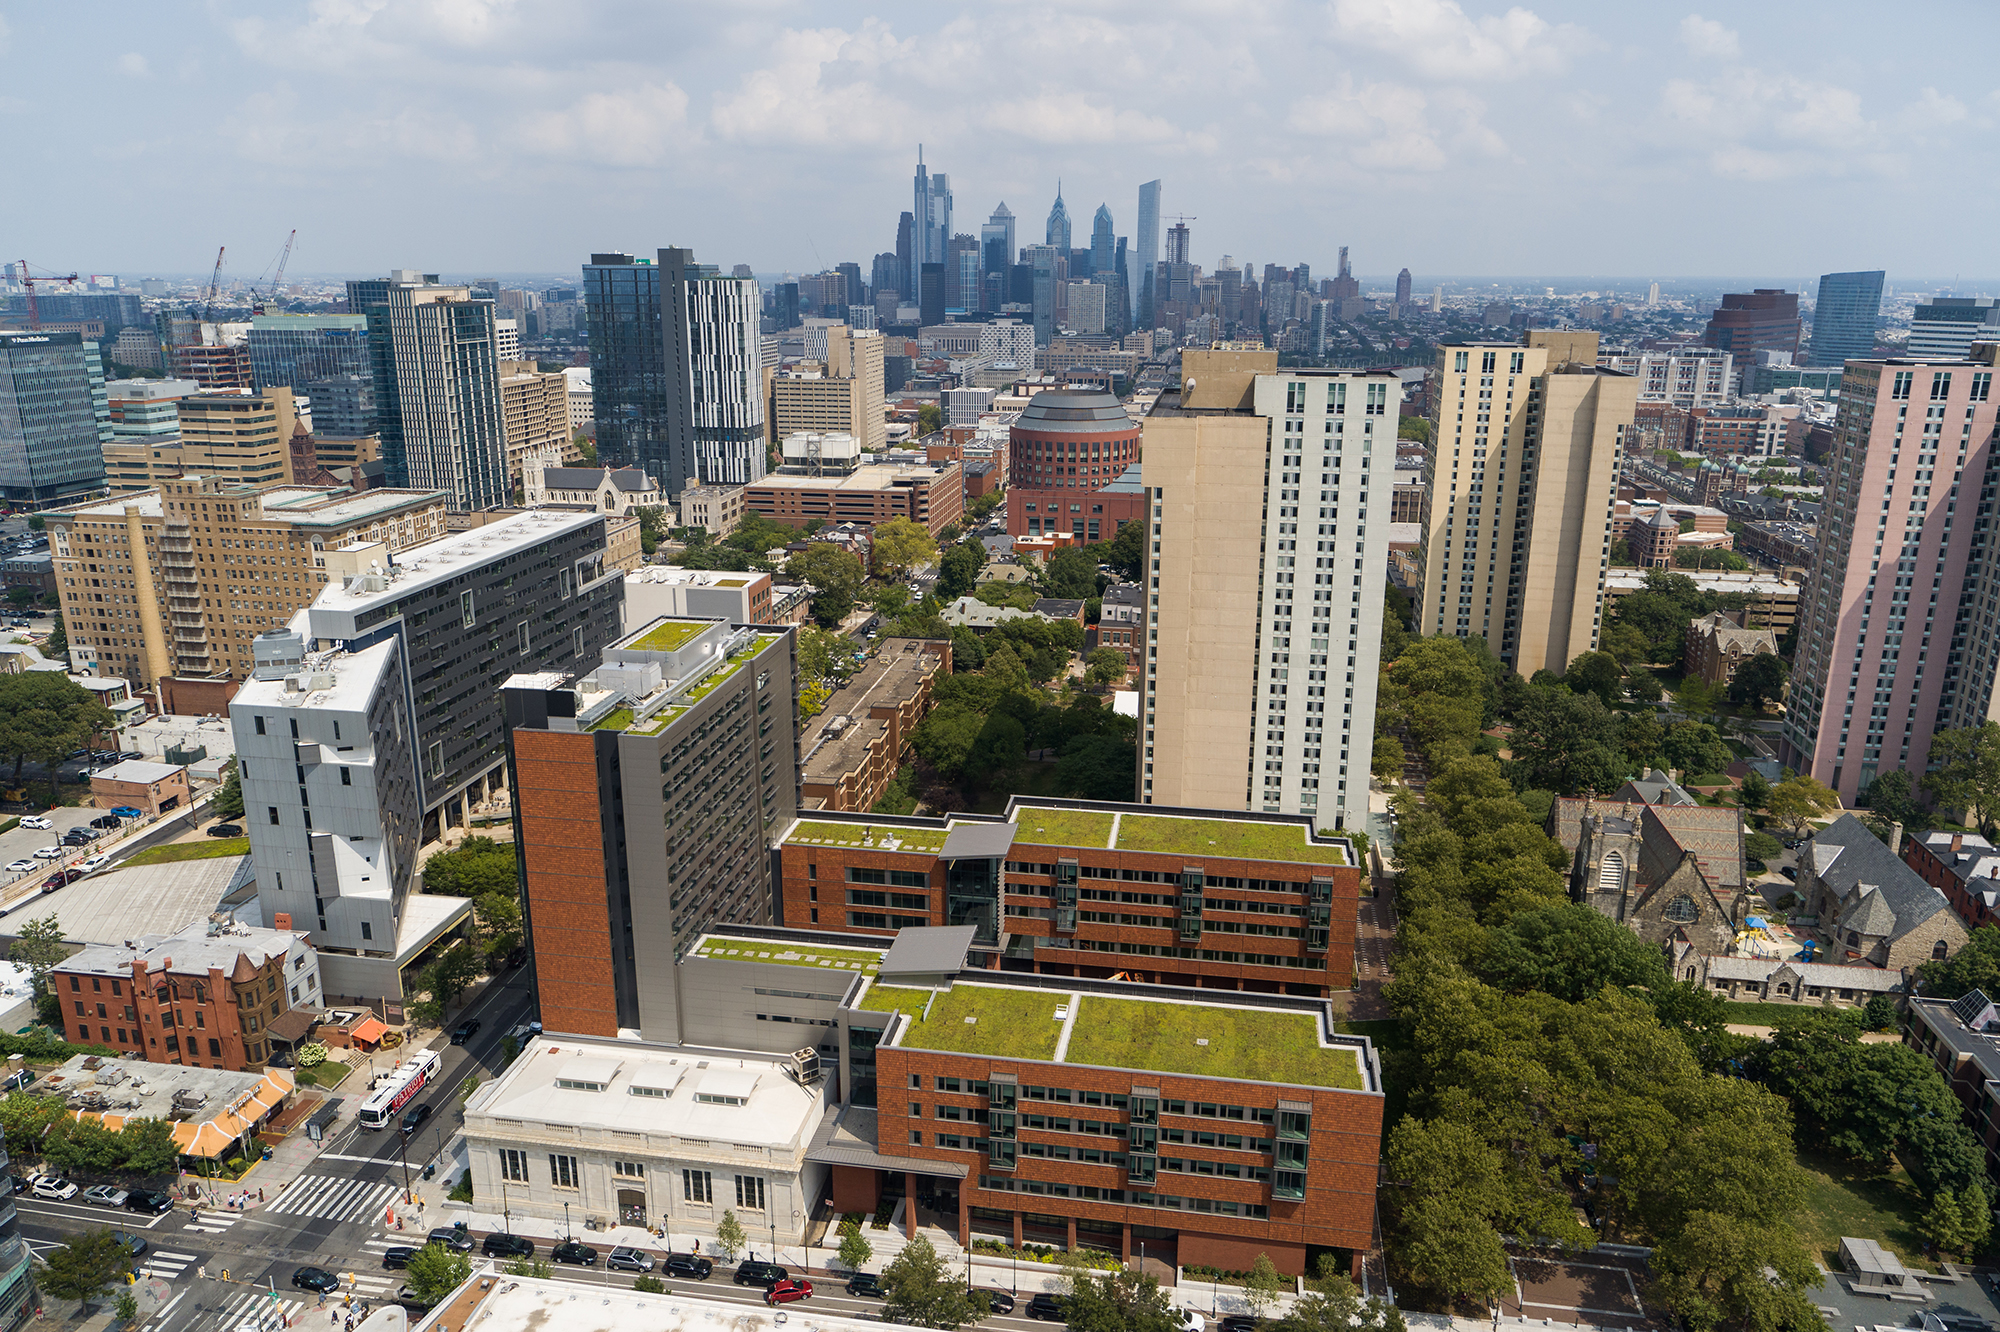 Aerial view of Gutmann College House and city of Philadelphia